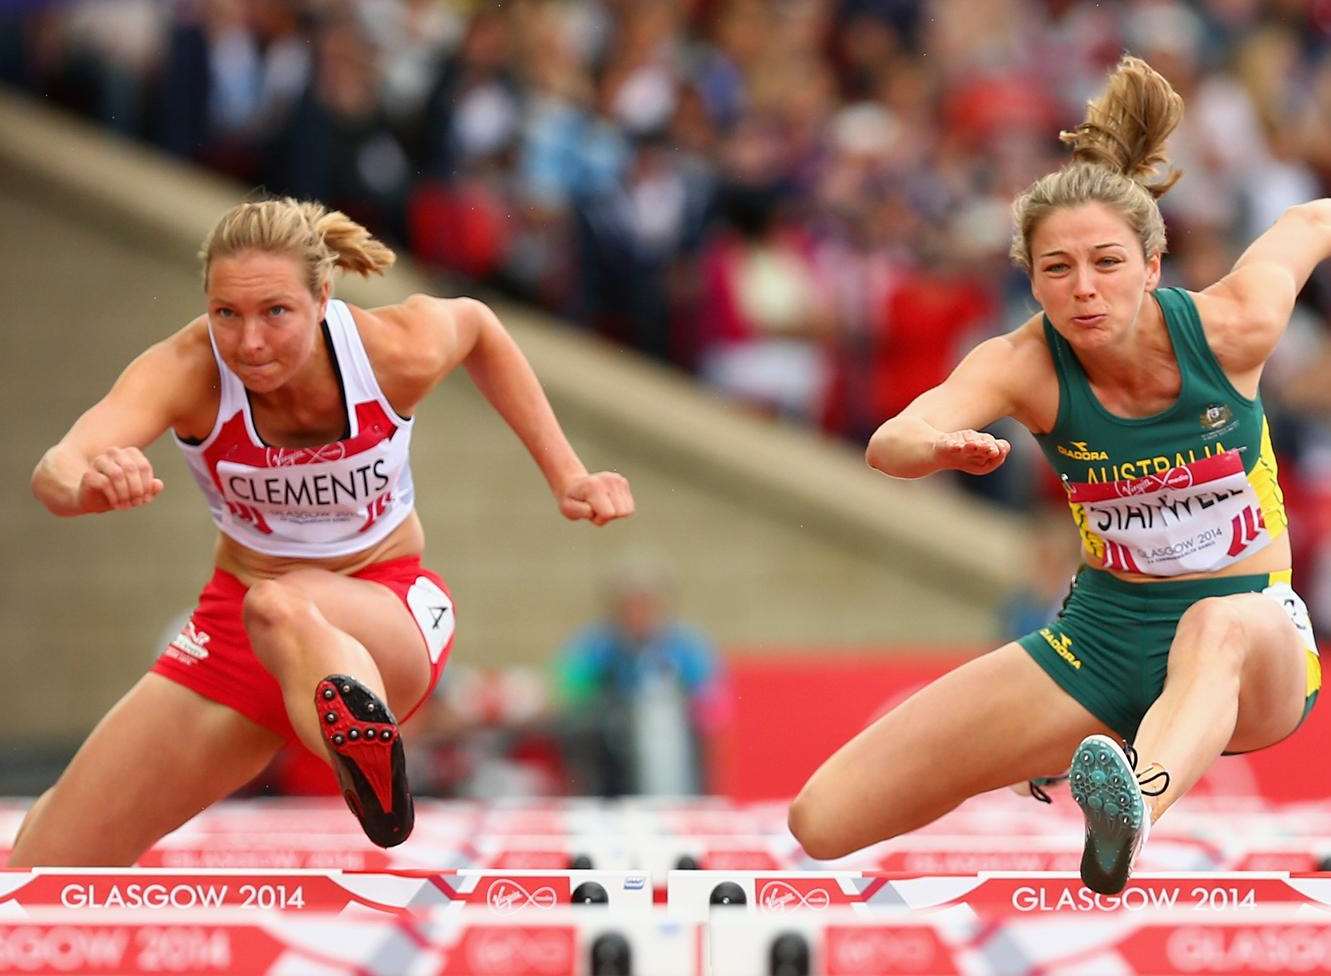 Grace Clements, left, and Sophie Stanwell of Australia compete in the women's heptathlon 100m hurdles at the Glasgow 2014 Commonwealth Games. Picture: Cameron Spencer/Getty Images